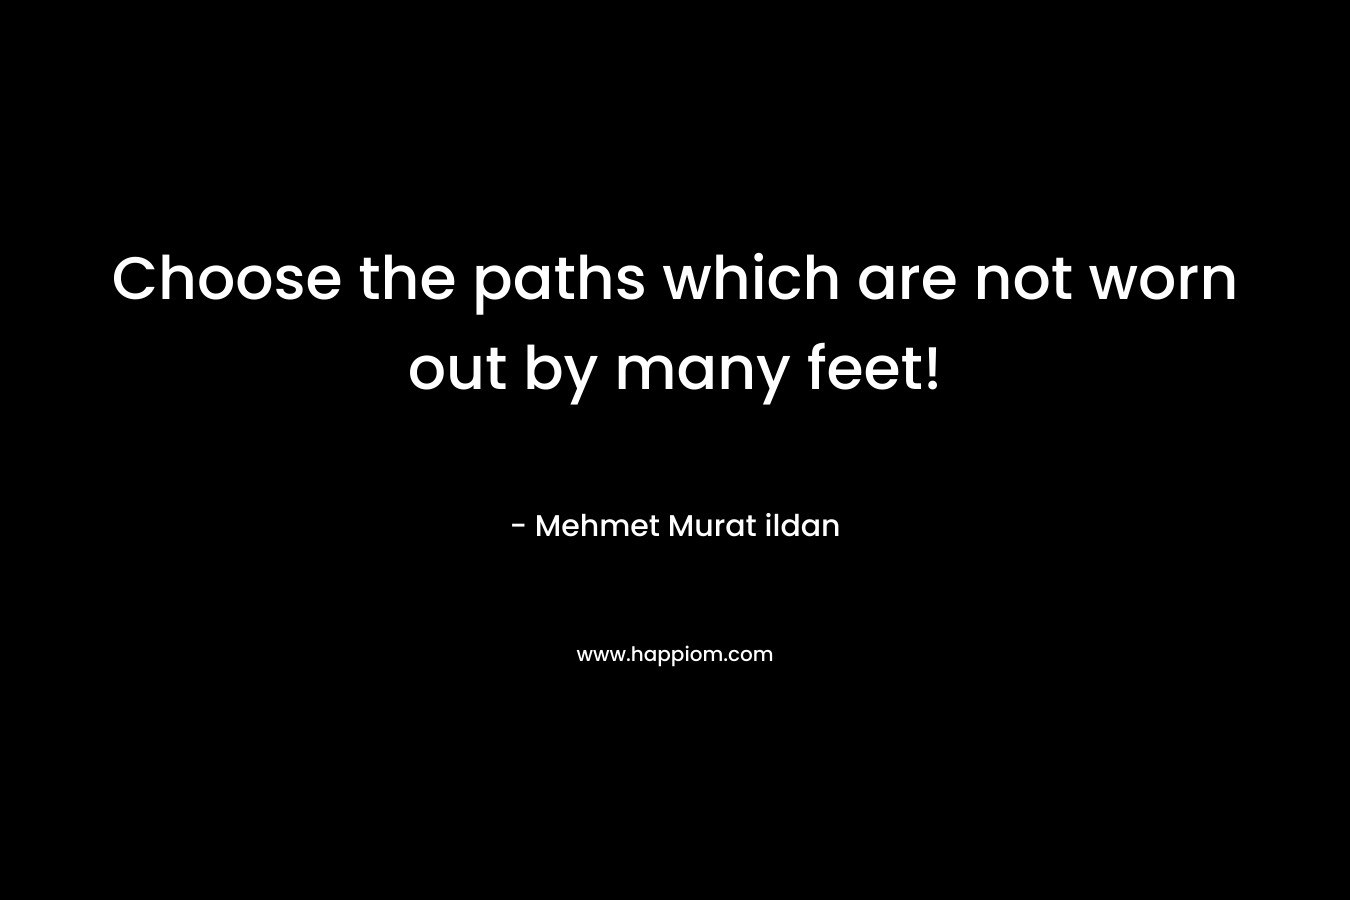 Choose the paths which are not worn out by many feet!